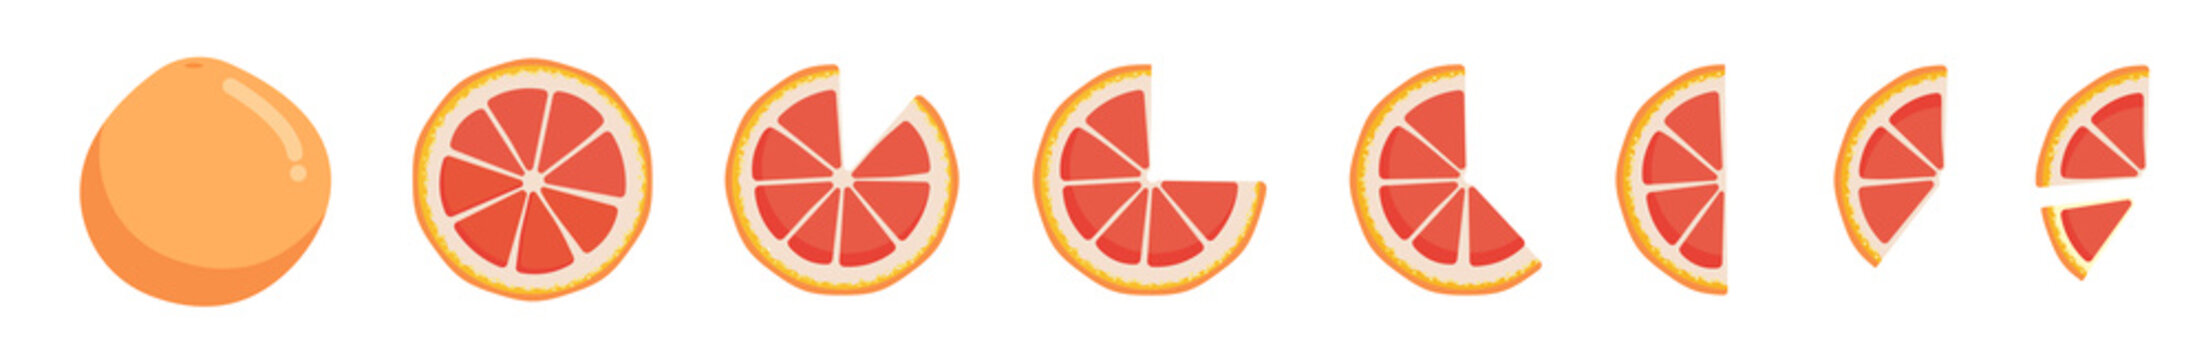 Vitamin C. Set of vector isolated elements. Bright fresh ripe juicy whole and cut grapefruit and slices isolated on white background. Clip art for your design